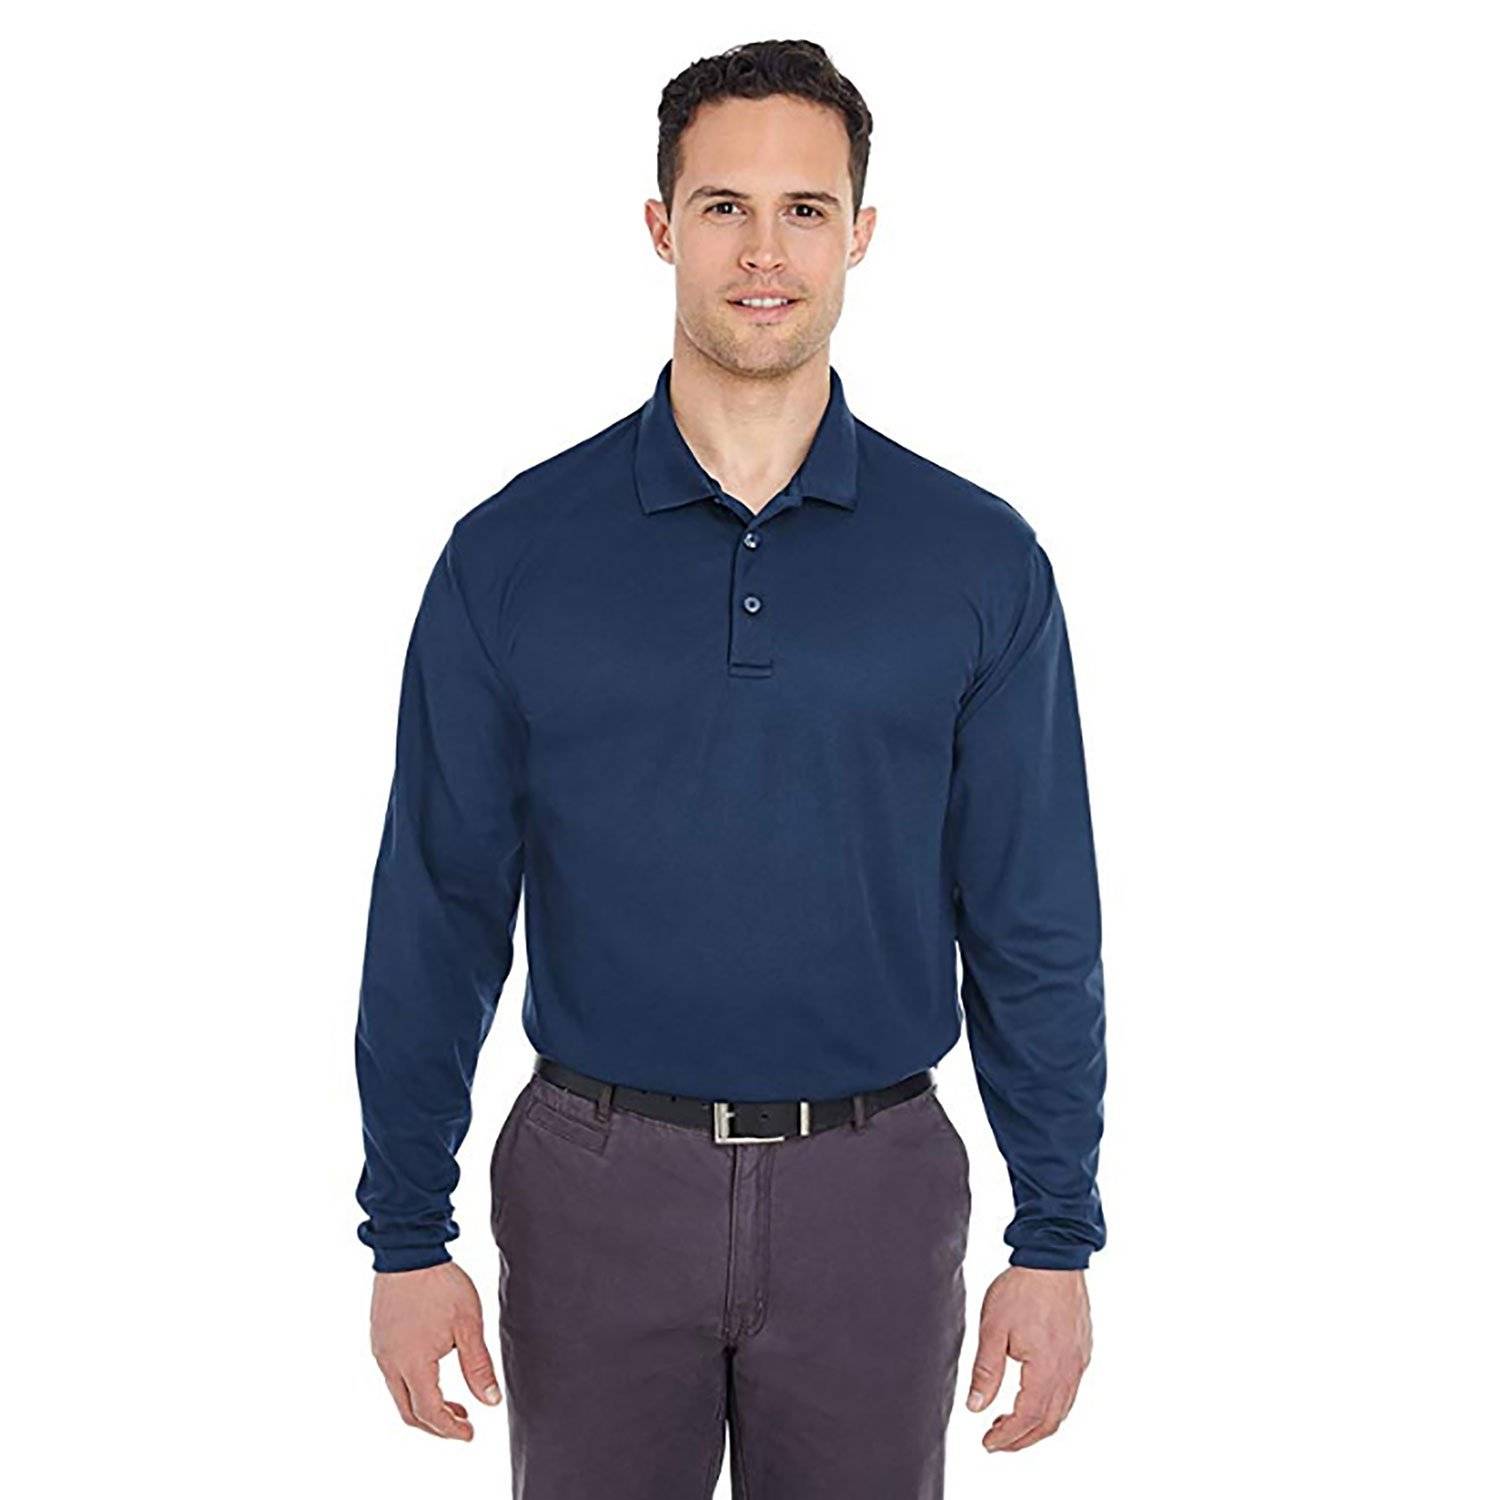 Ultraclub Mens Cool and Dry Long Sleeve Pique Polo